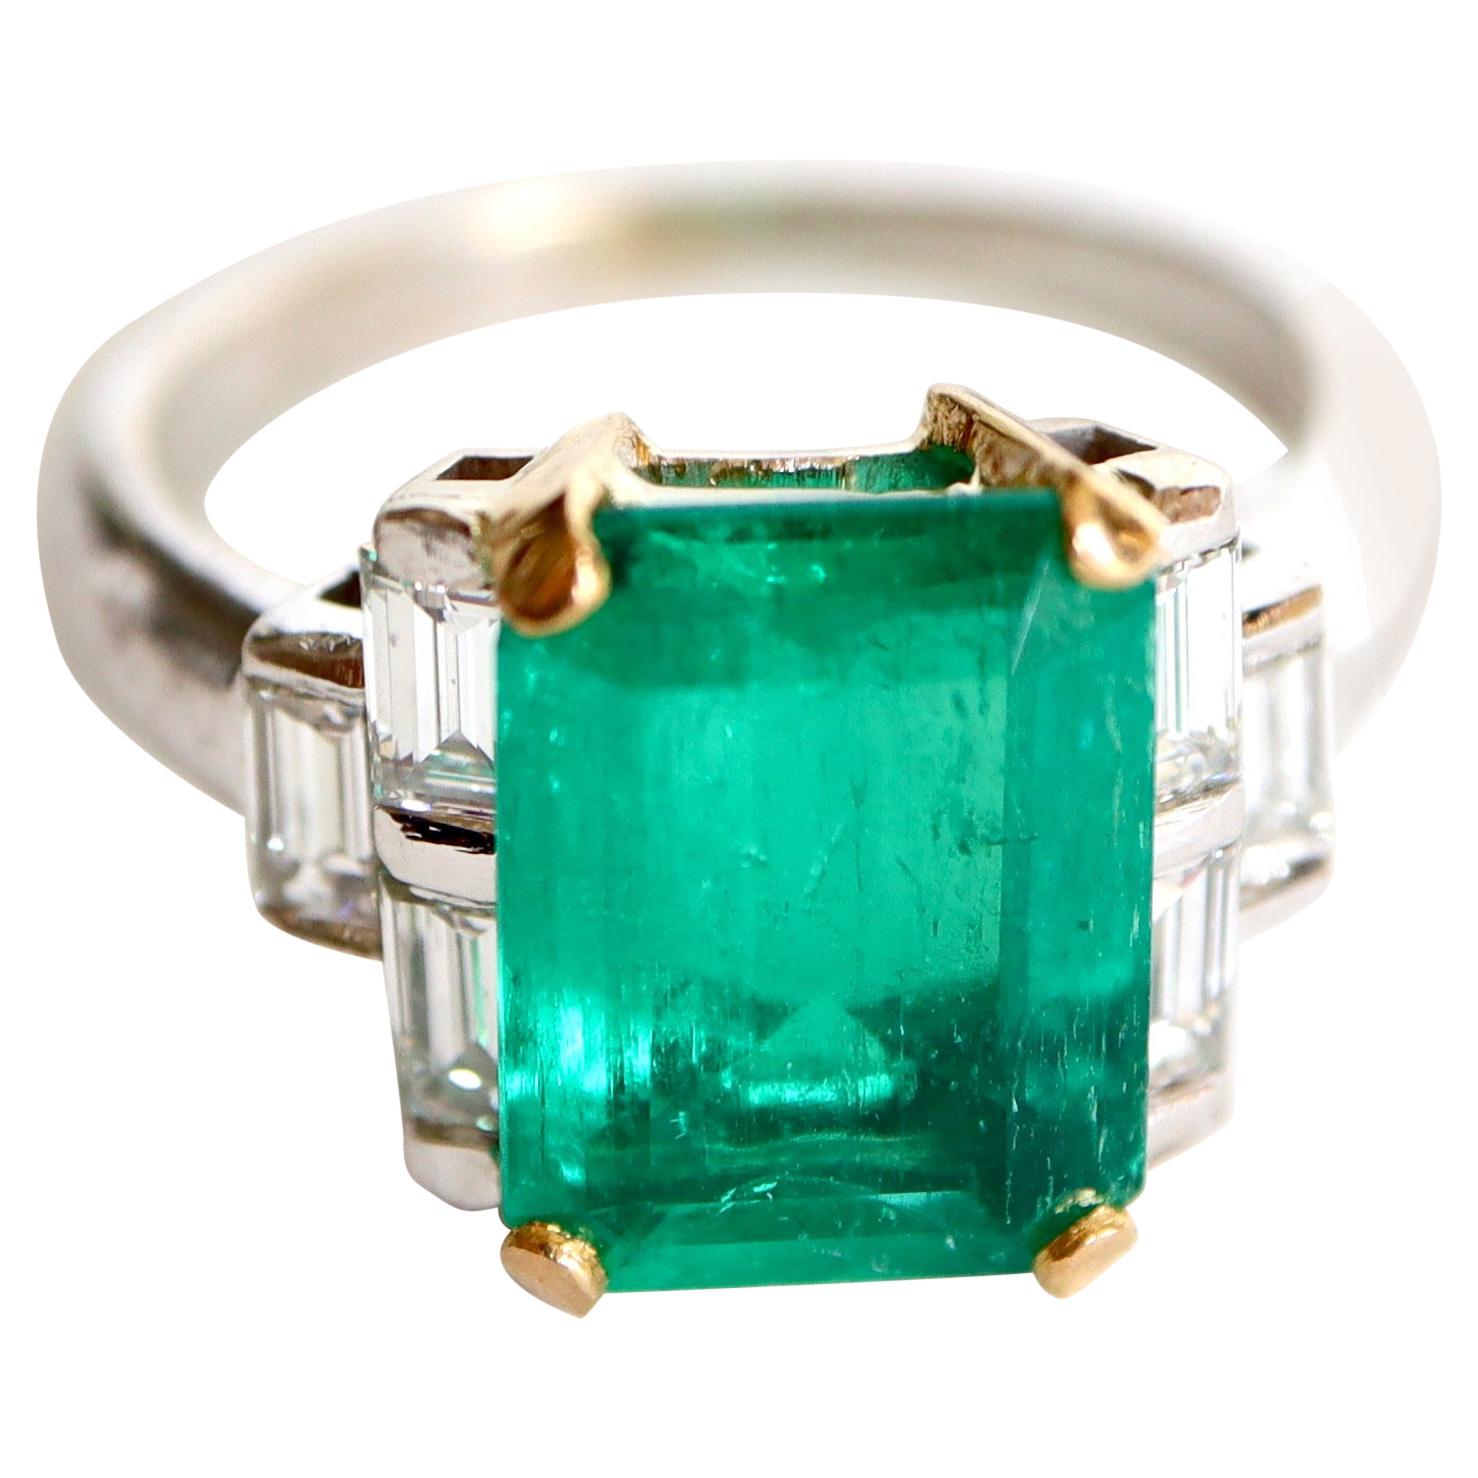 Emerald Ring 3.71 Carat in 18K White and Yellow Gold, Diamonds